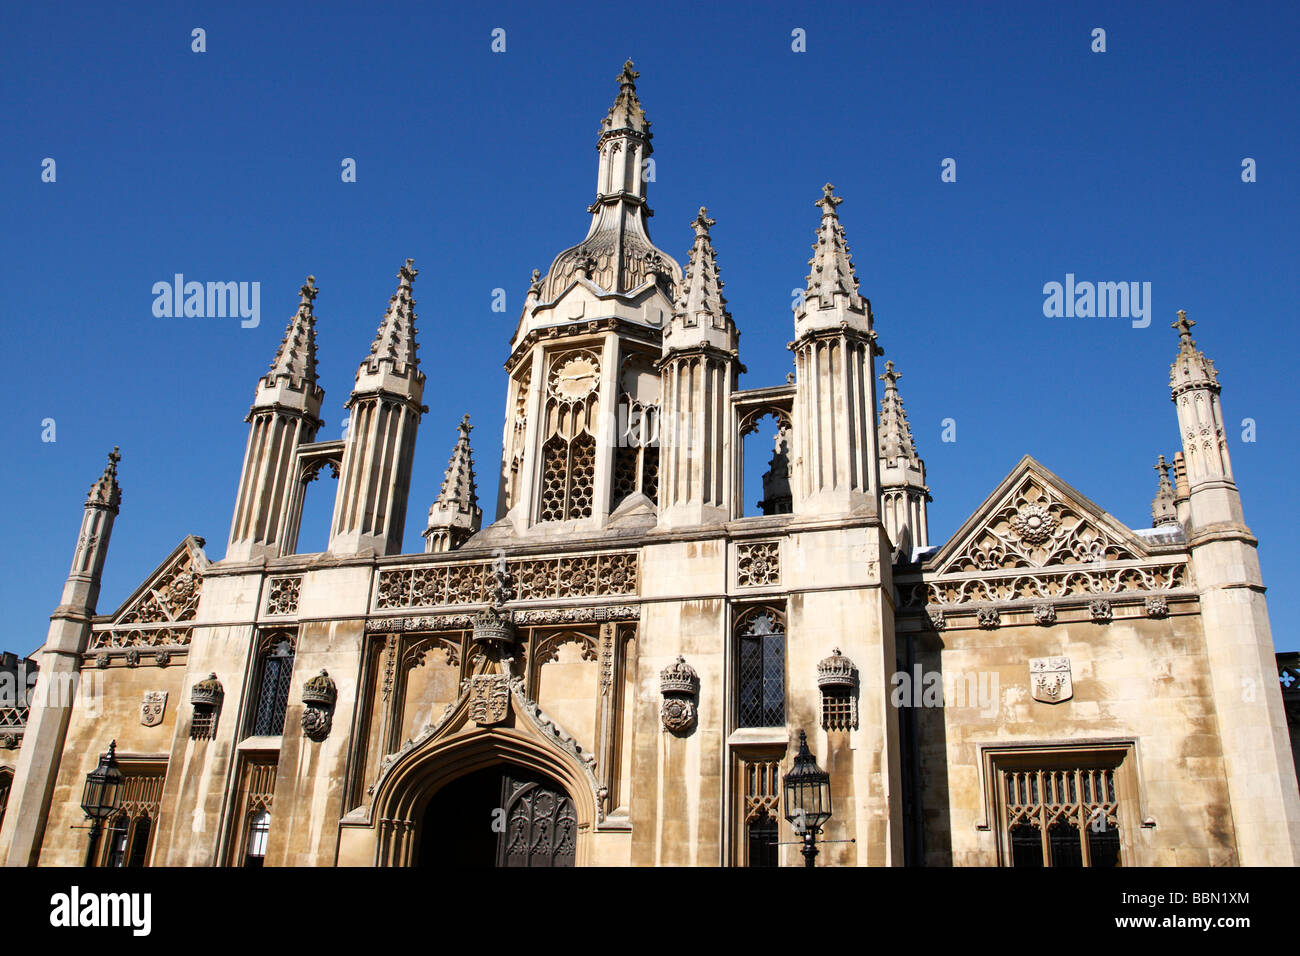 main entrance known as the gatehouse to king's college on king's parade cambridge uk Stock Photo